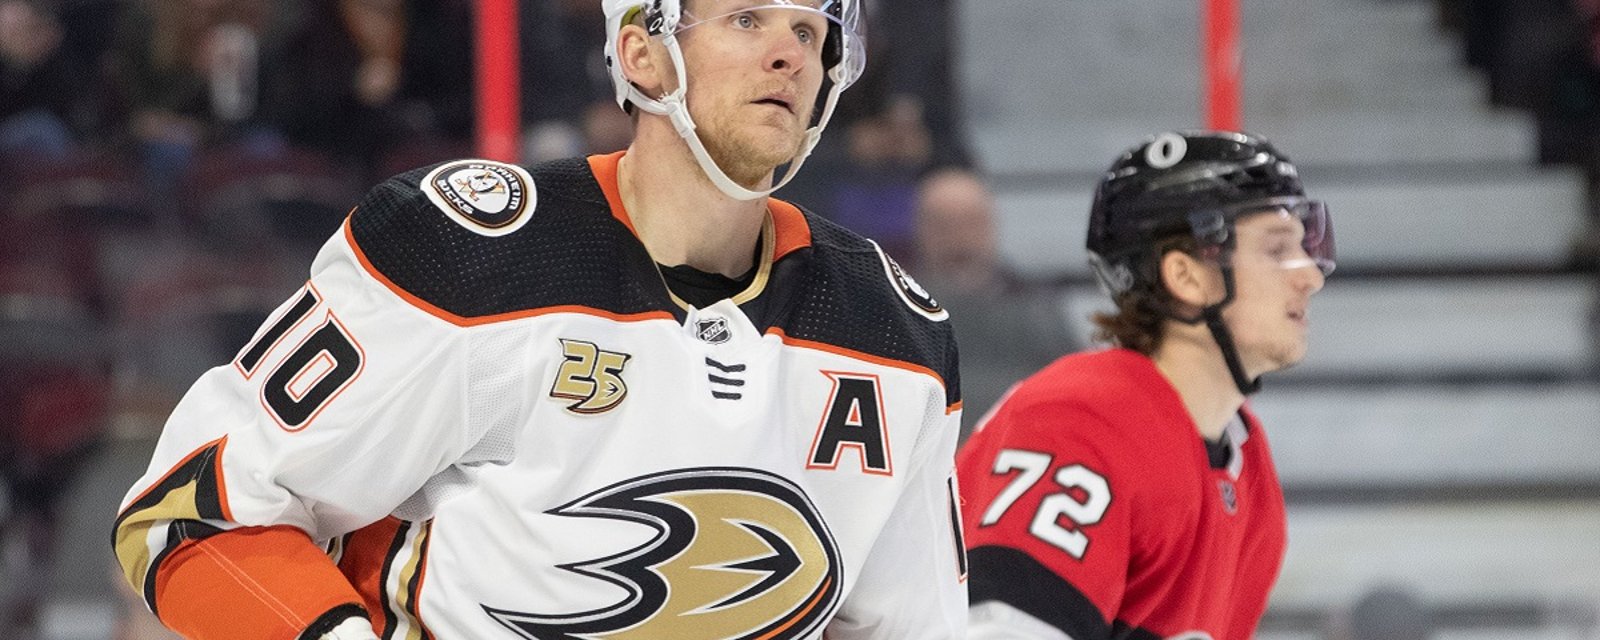 Oilers officially announce Corey Perry signing on Monday.